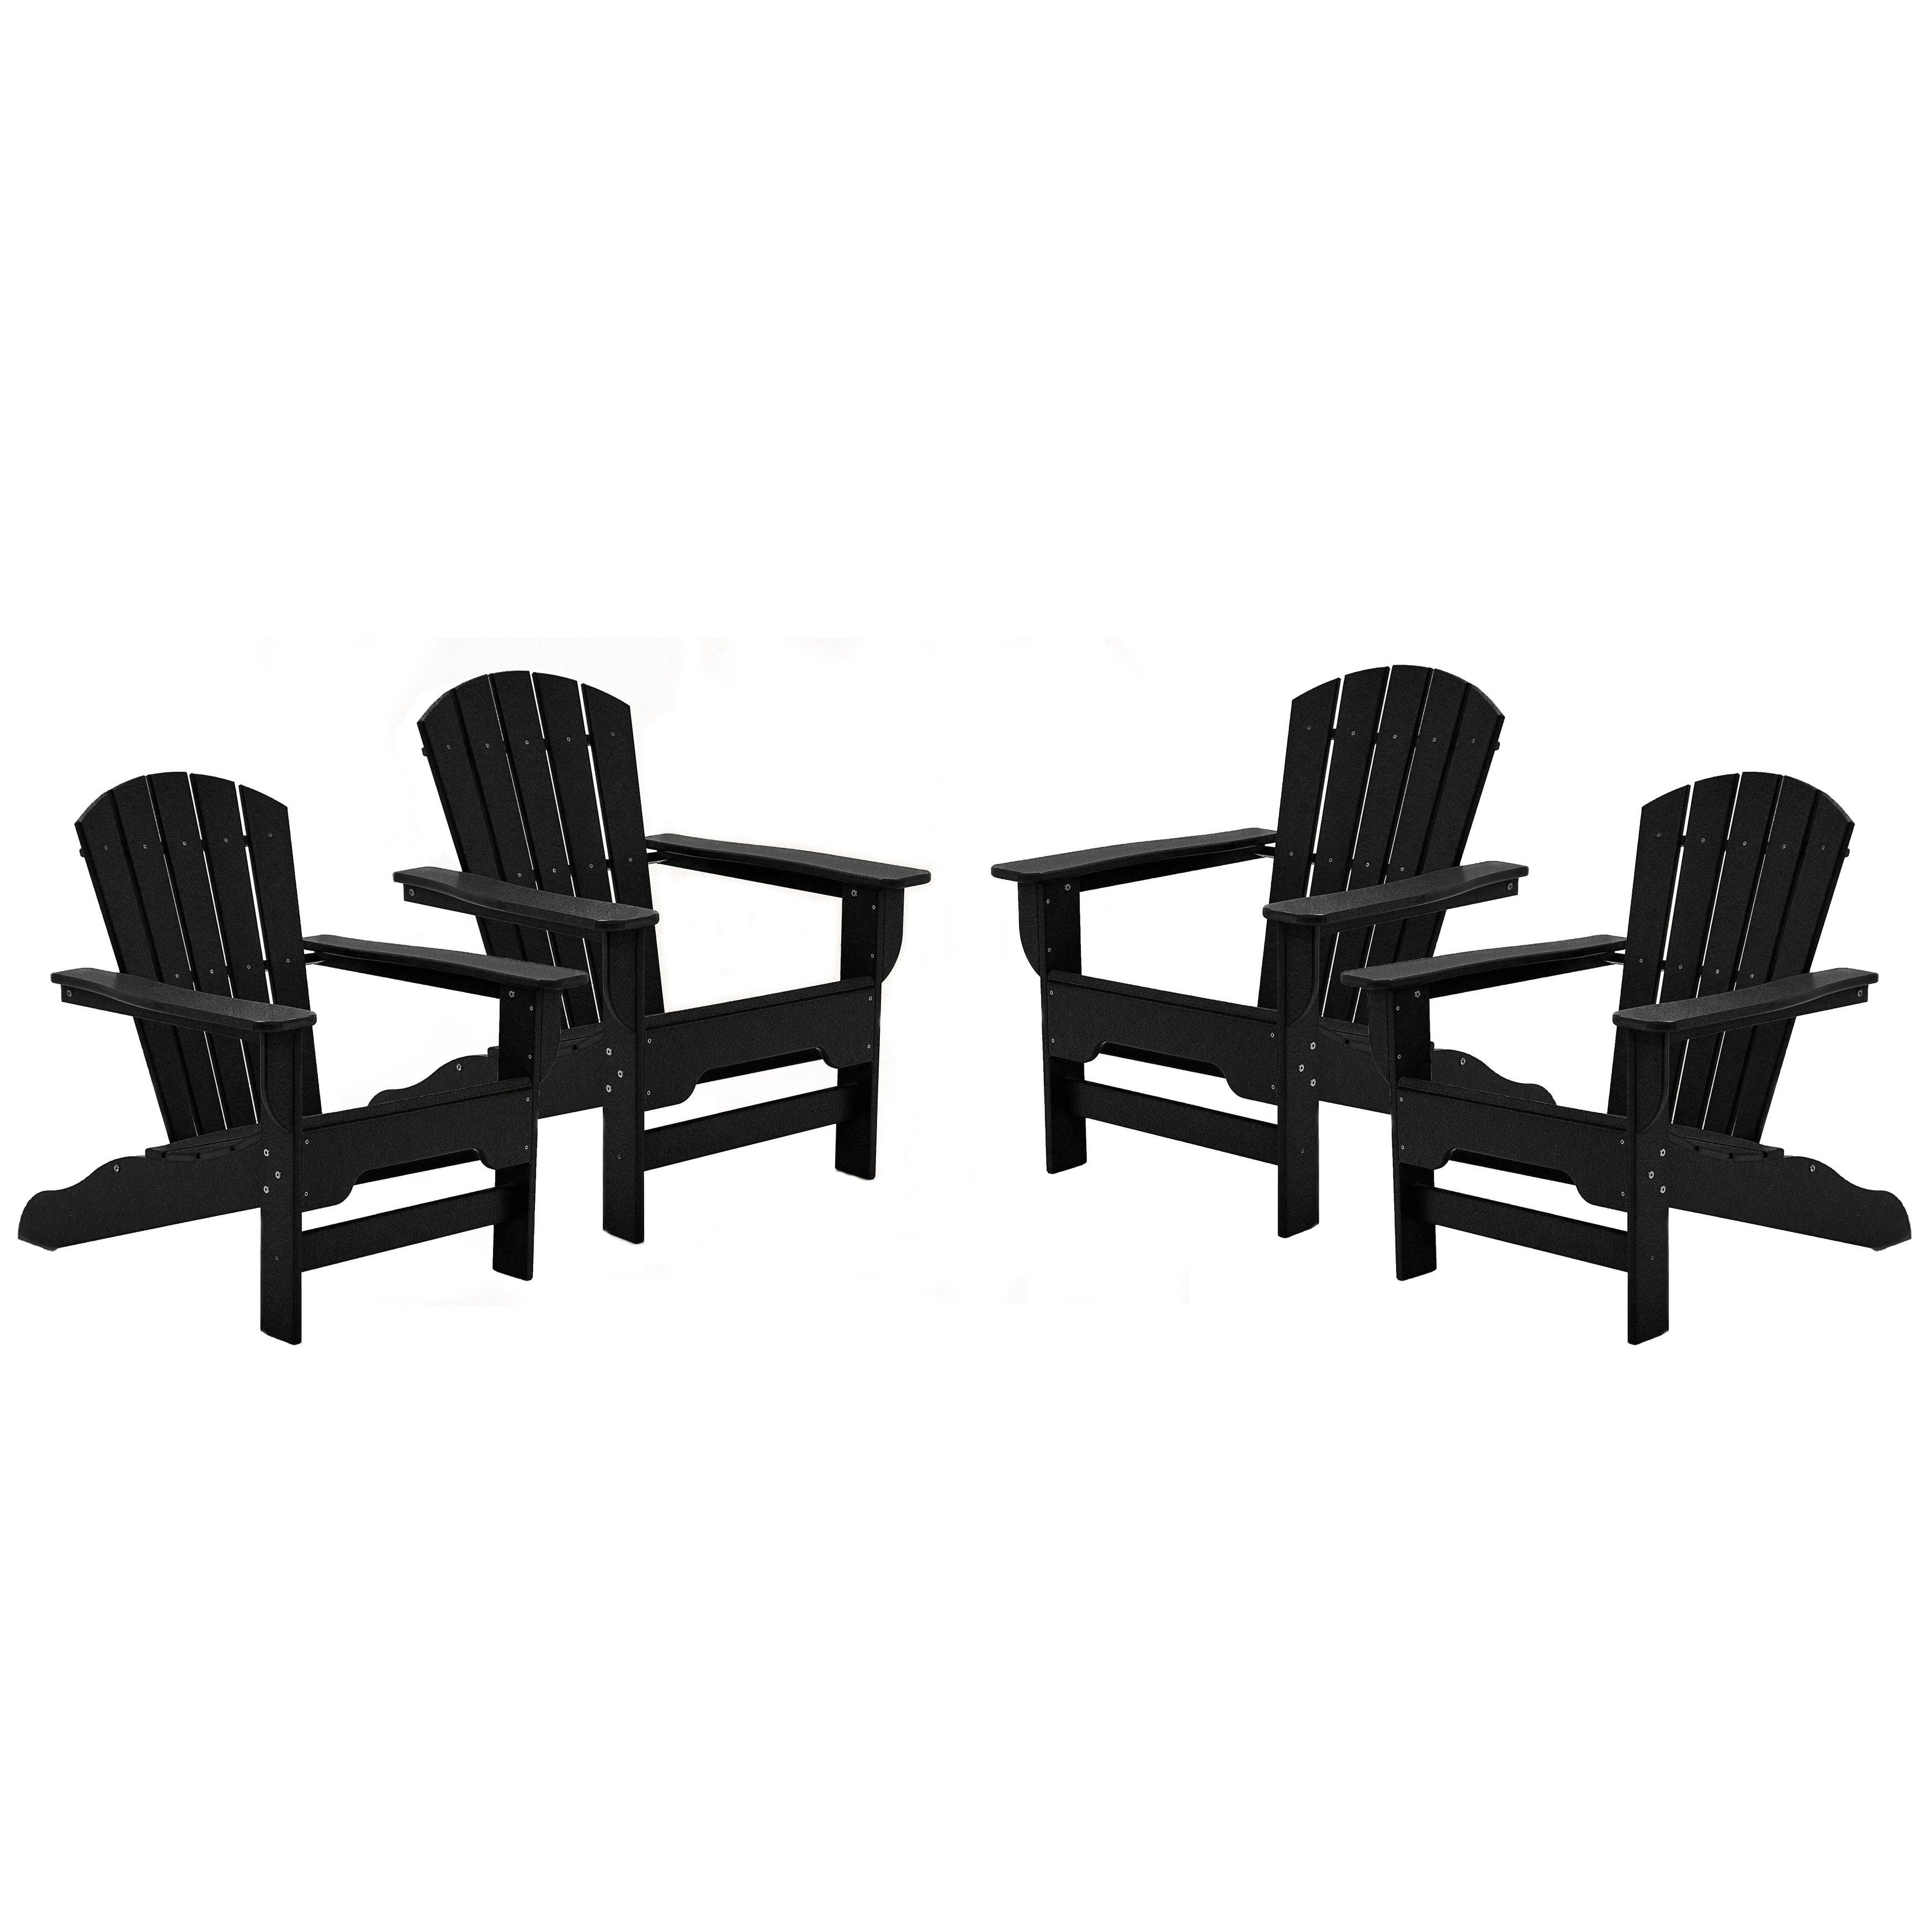 Hawkesbury 4-piece Recycled Plastic Fanback Adirondack Chair Set By Havenside Home